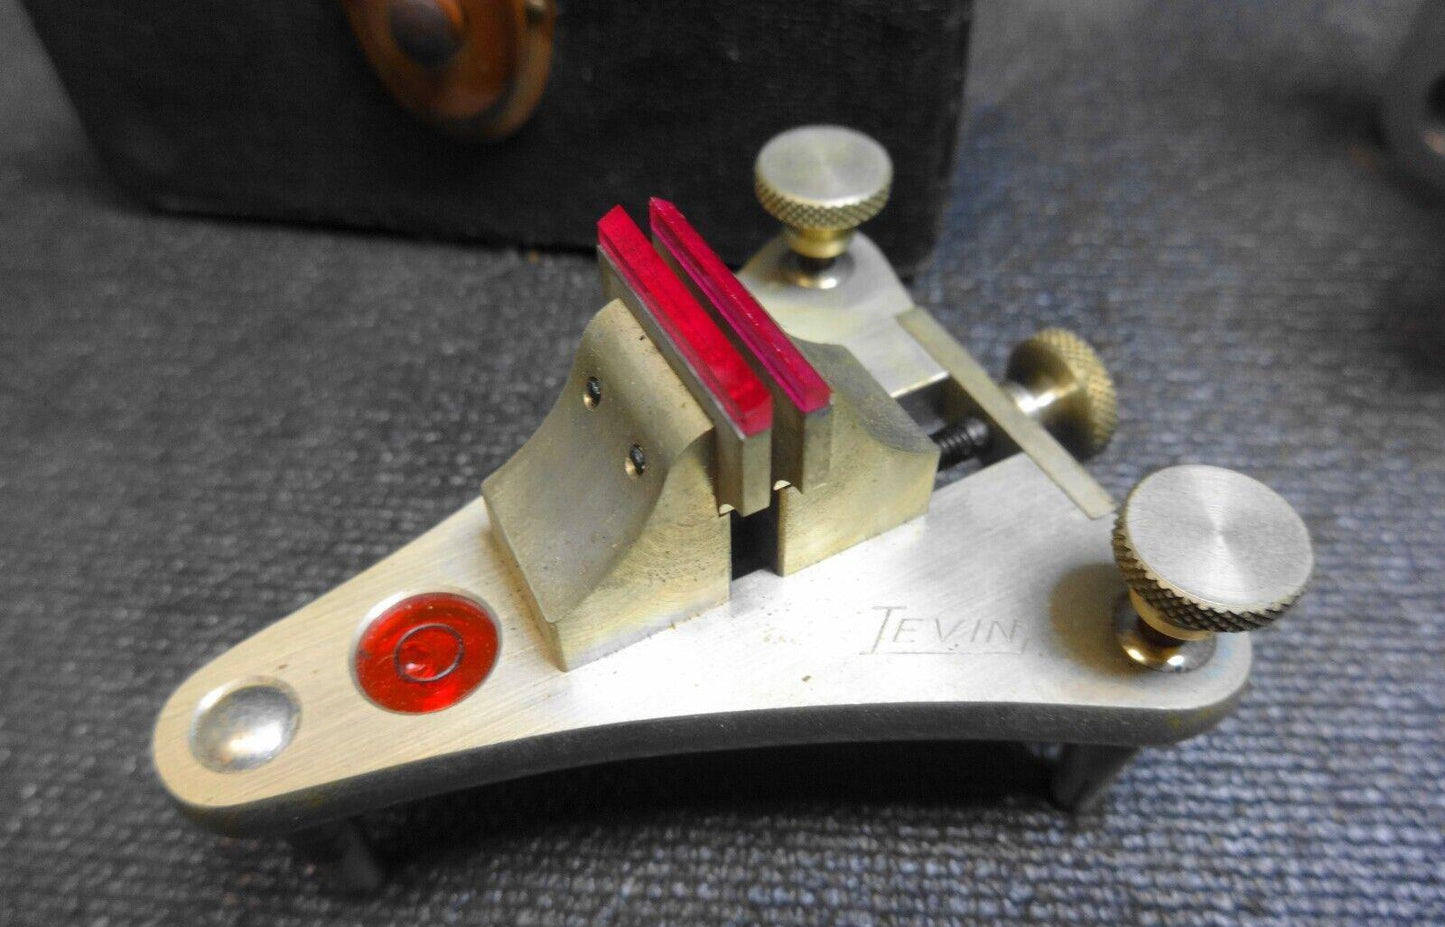 Levin Jeweler Posing Vise Clamp Ruby Jaw Watchmakers Tool in Original Case